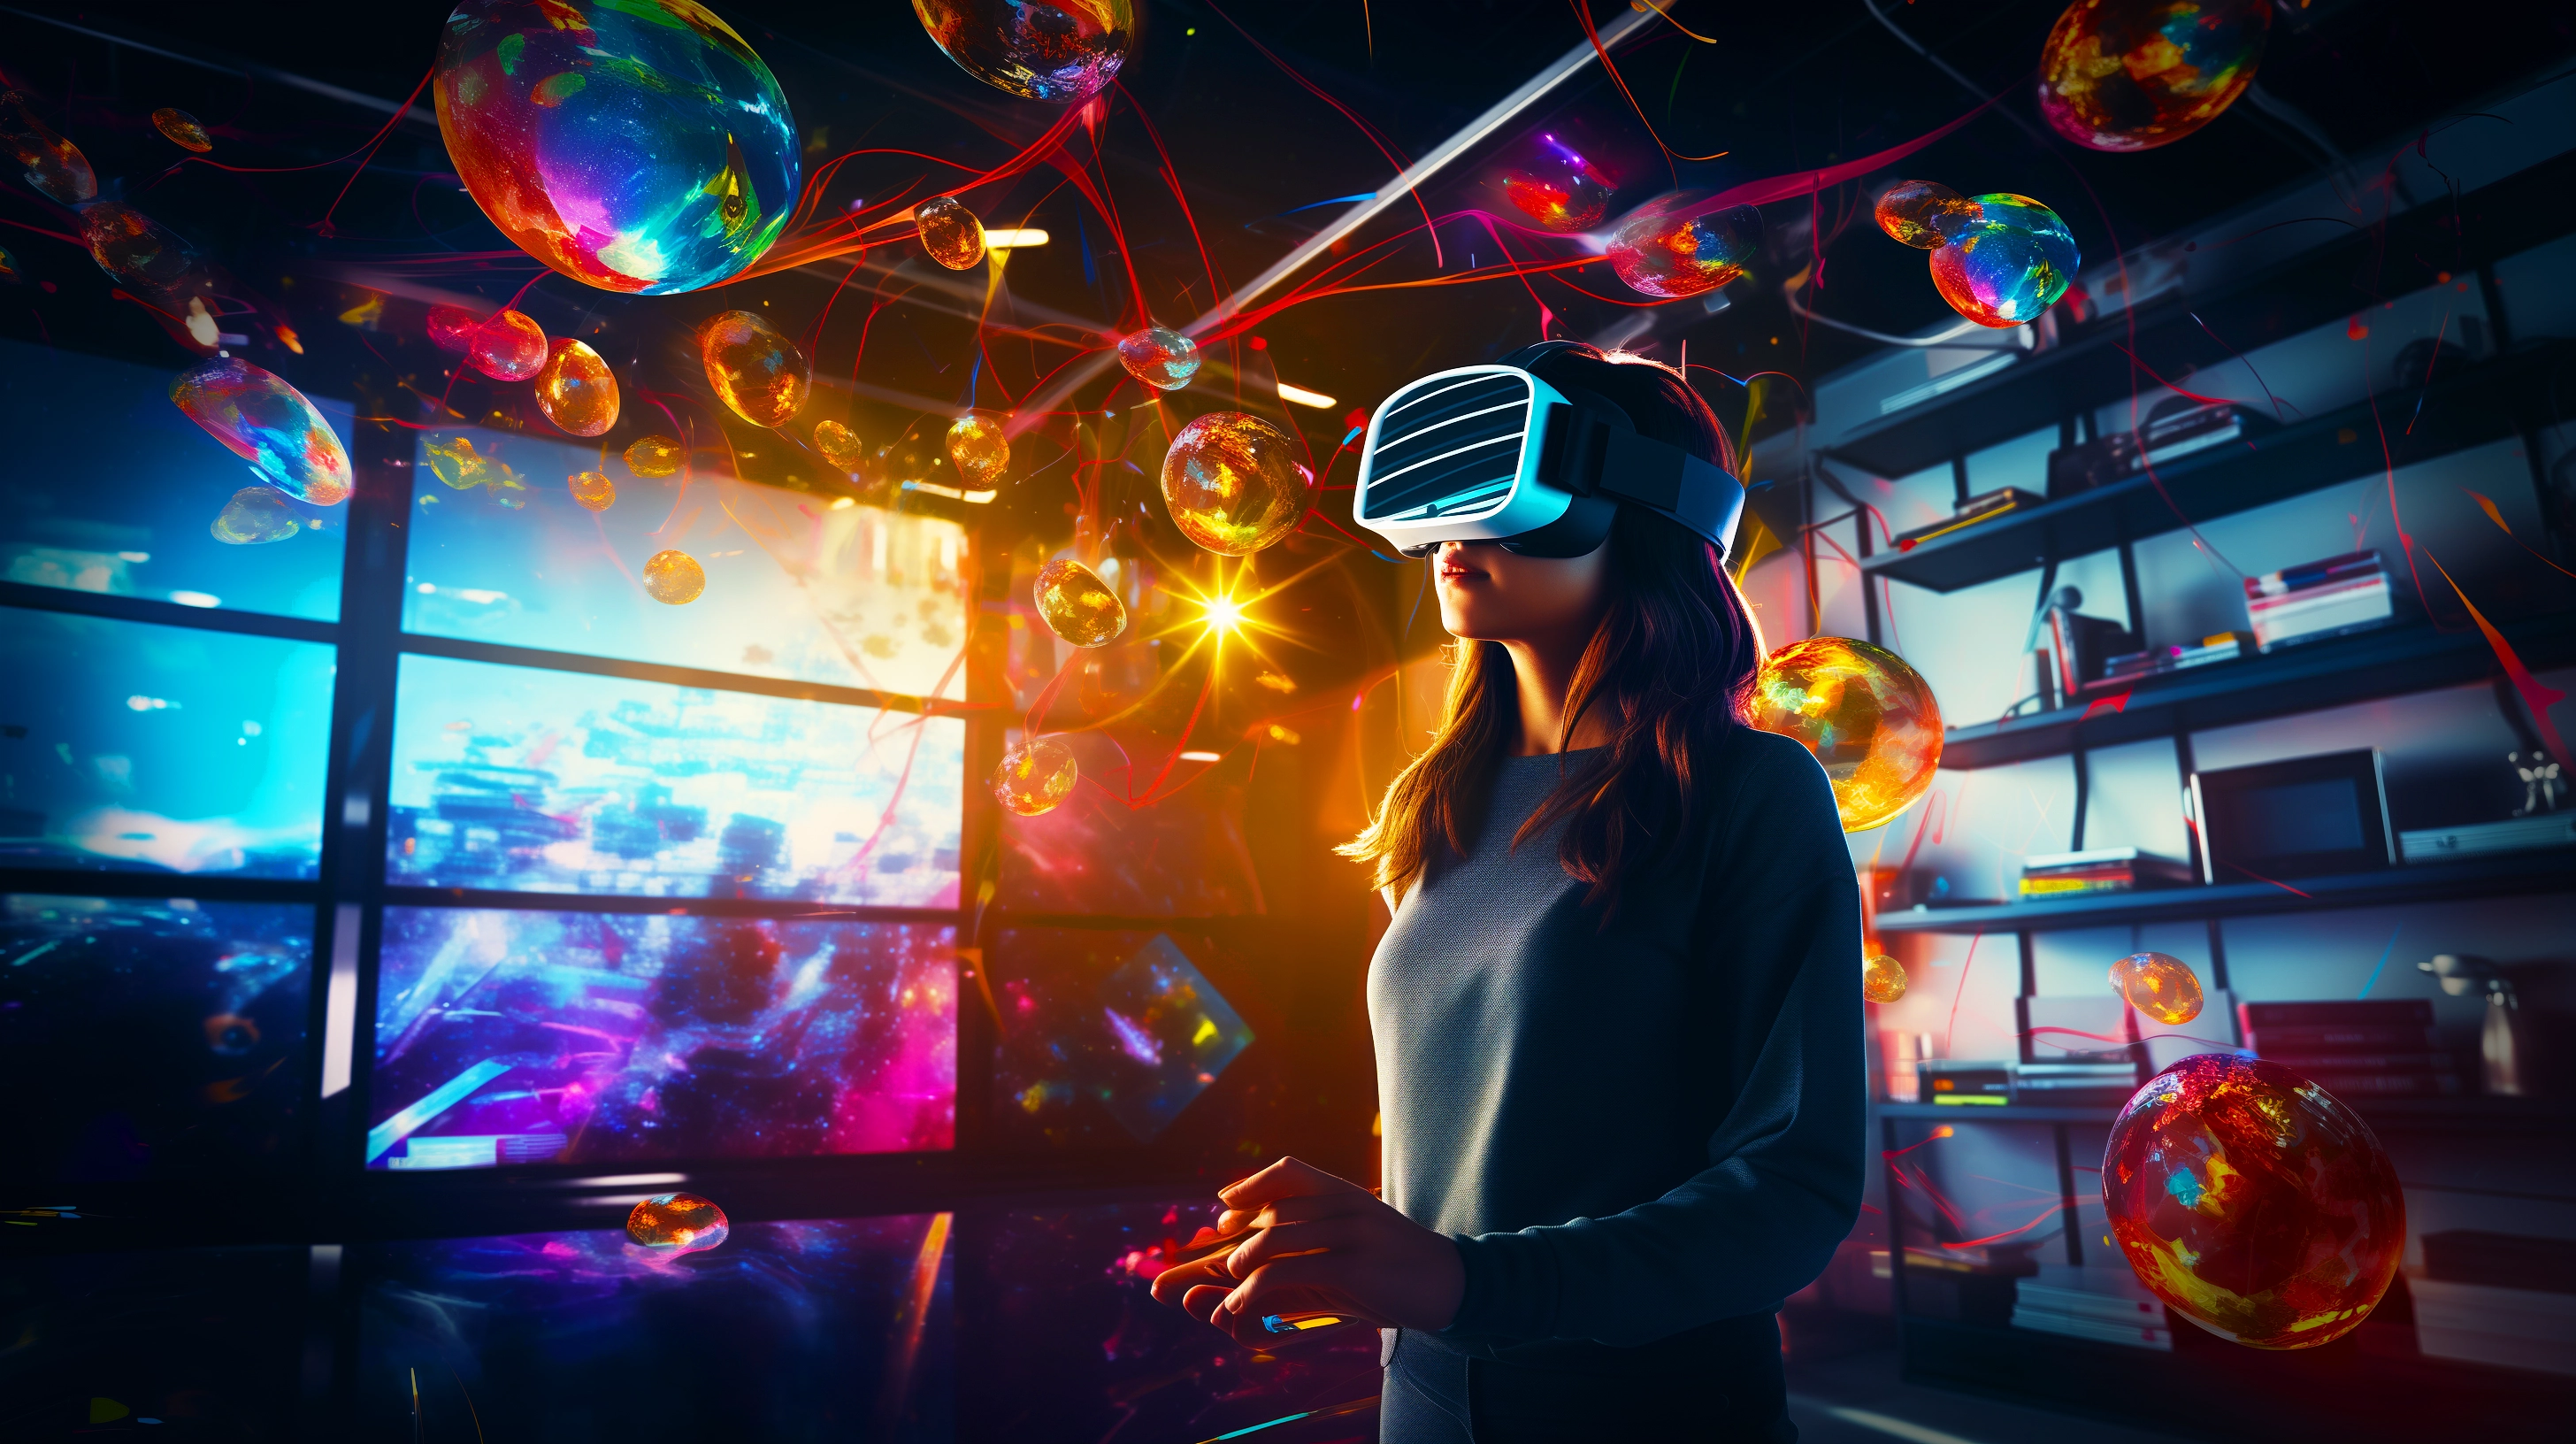 woman wearing VR headsets in colorful environment